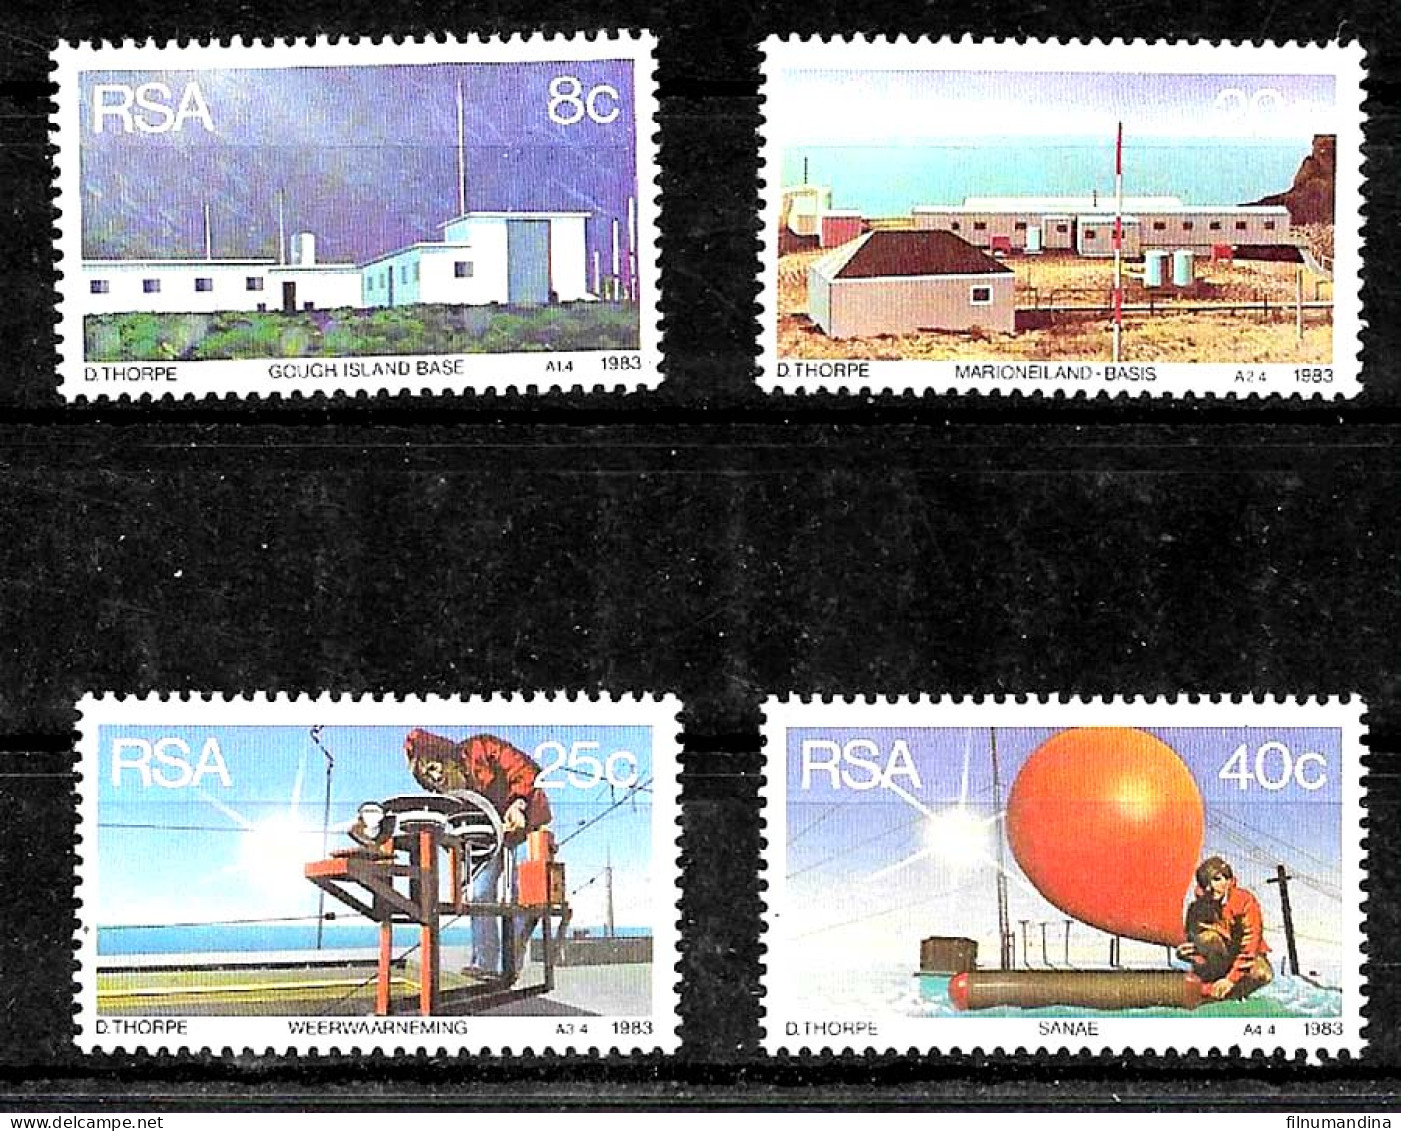 #60001 SOUTH AFRICA 1983  METEOROLOGY RESEARCH STATION  YV 531-4 MNH - Climate & Meteorology